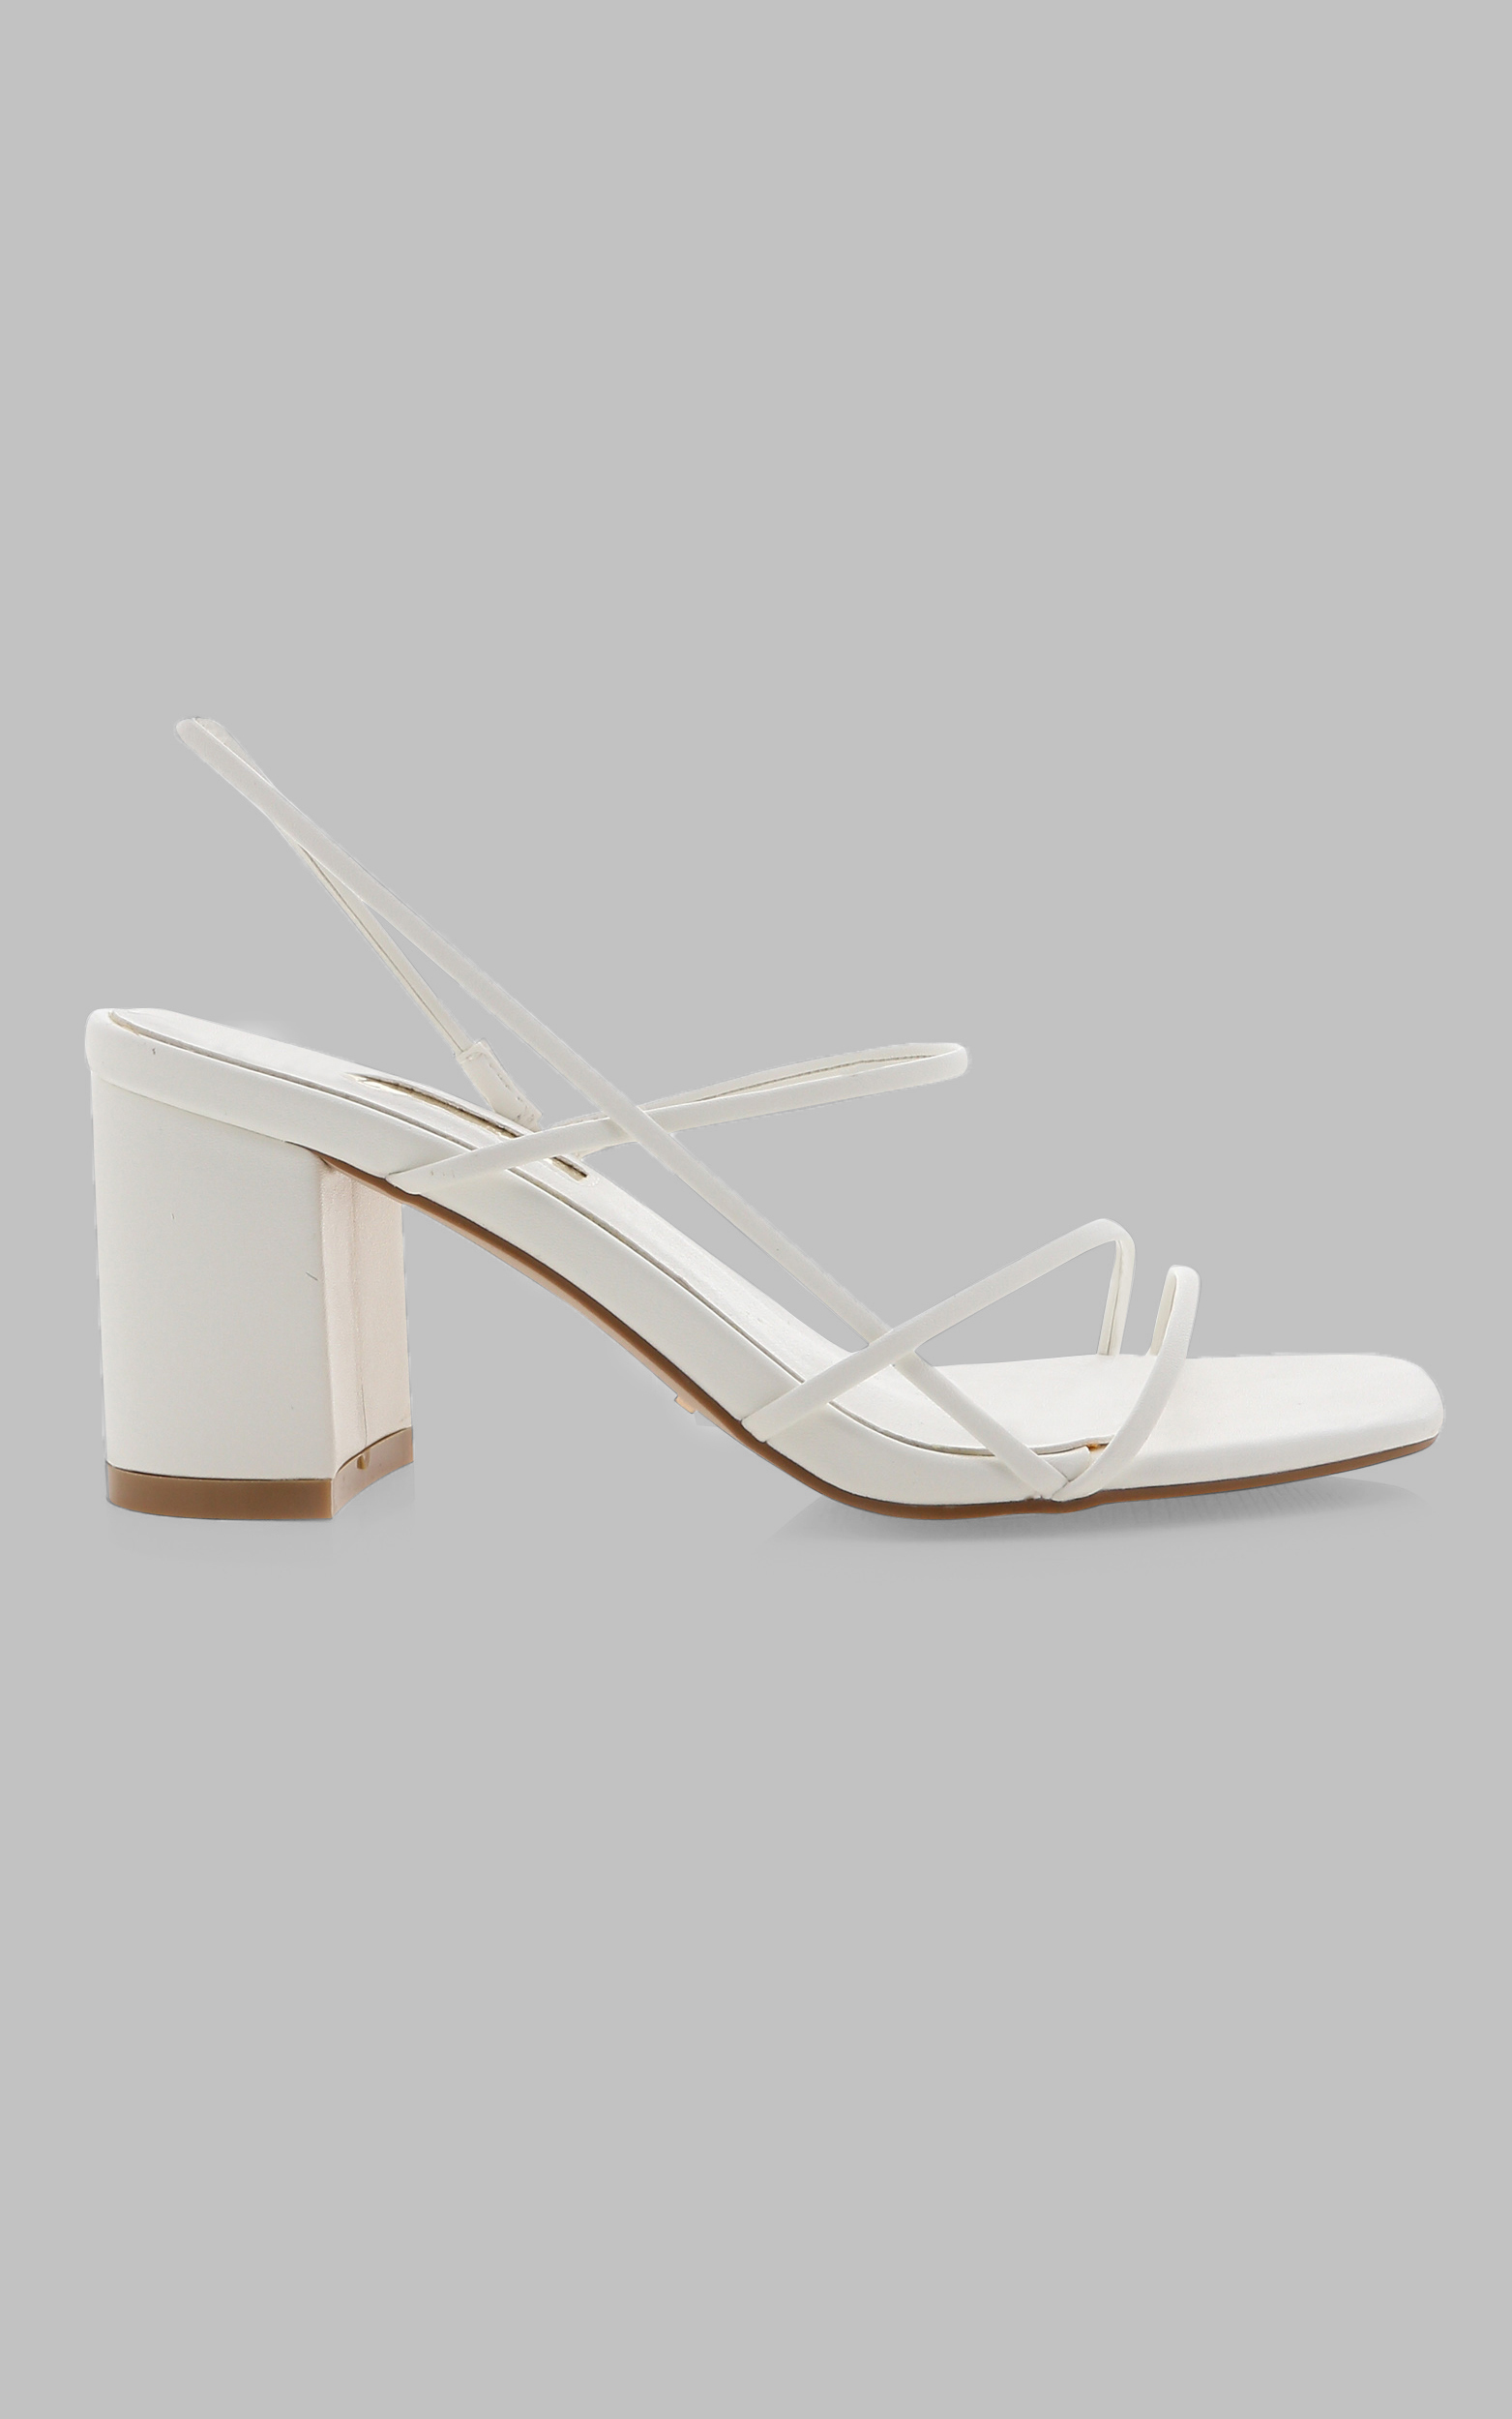 Billini - Yachi Heels in White - 05, WHT3, hi-res image number null